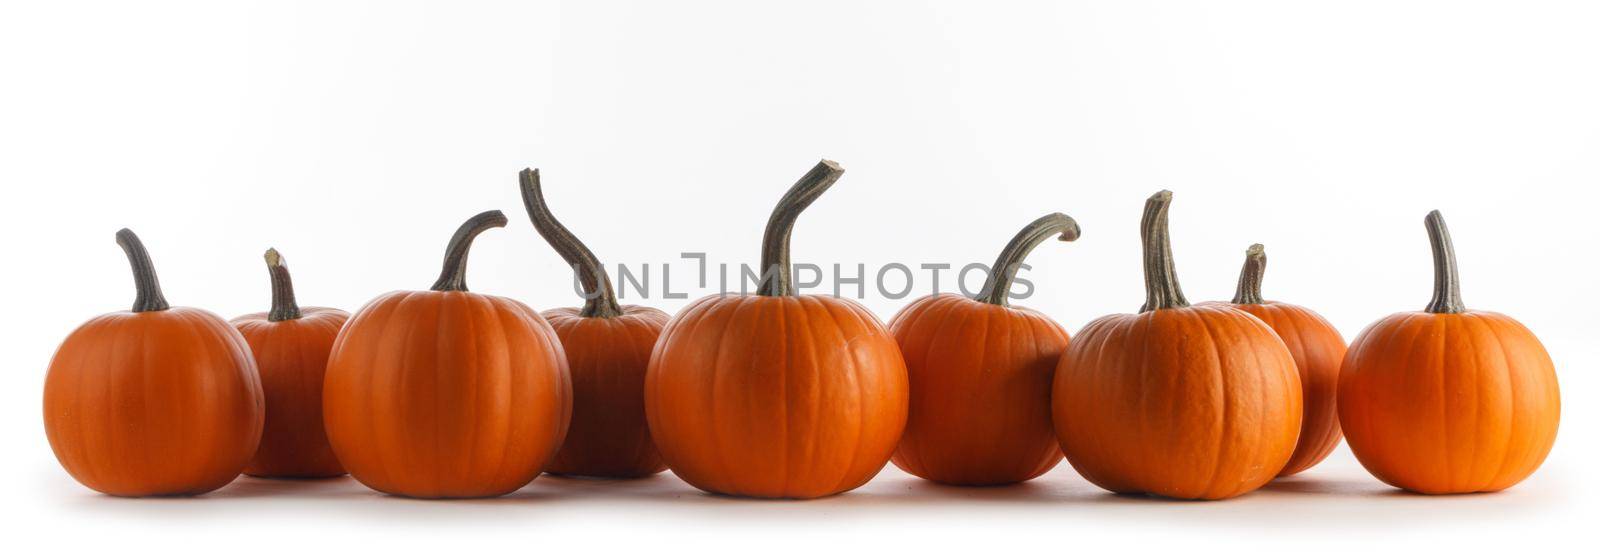 Many orange pumpkins in a row isolated on white background, Halloween day celebration concept, autumn harvest